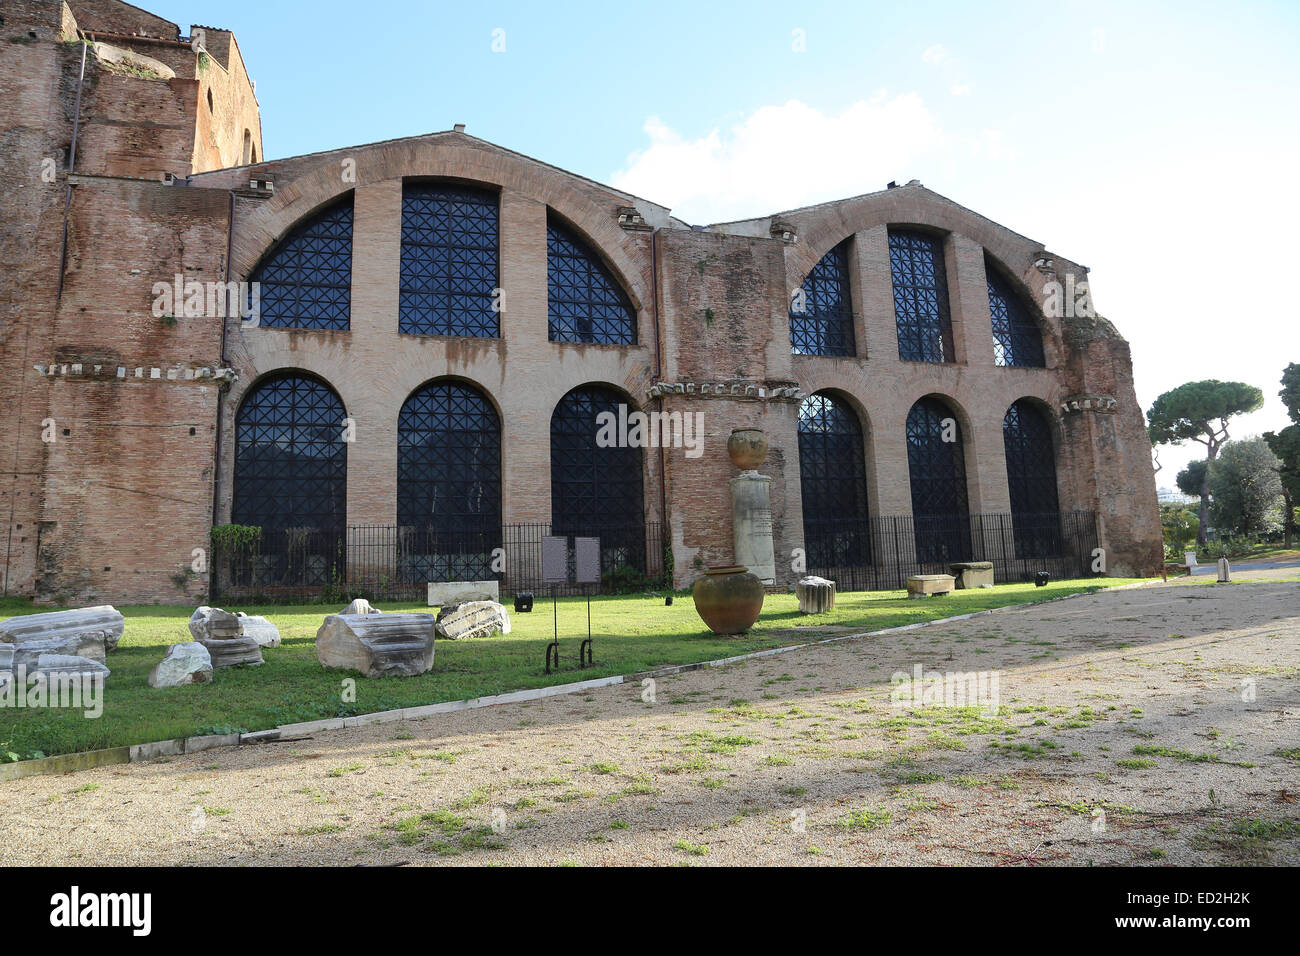 Italy. Rome. Baths of Diocletian. Rome. Ruins. Exterior. Stock Photo